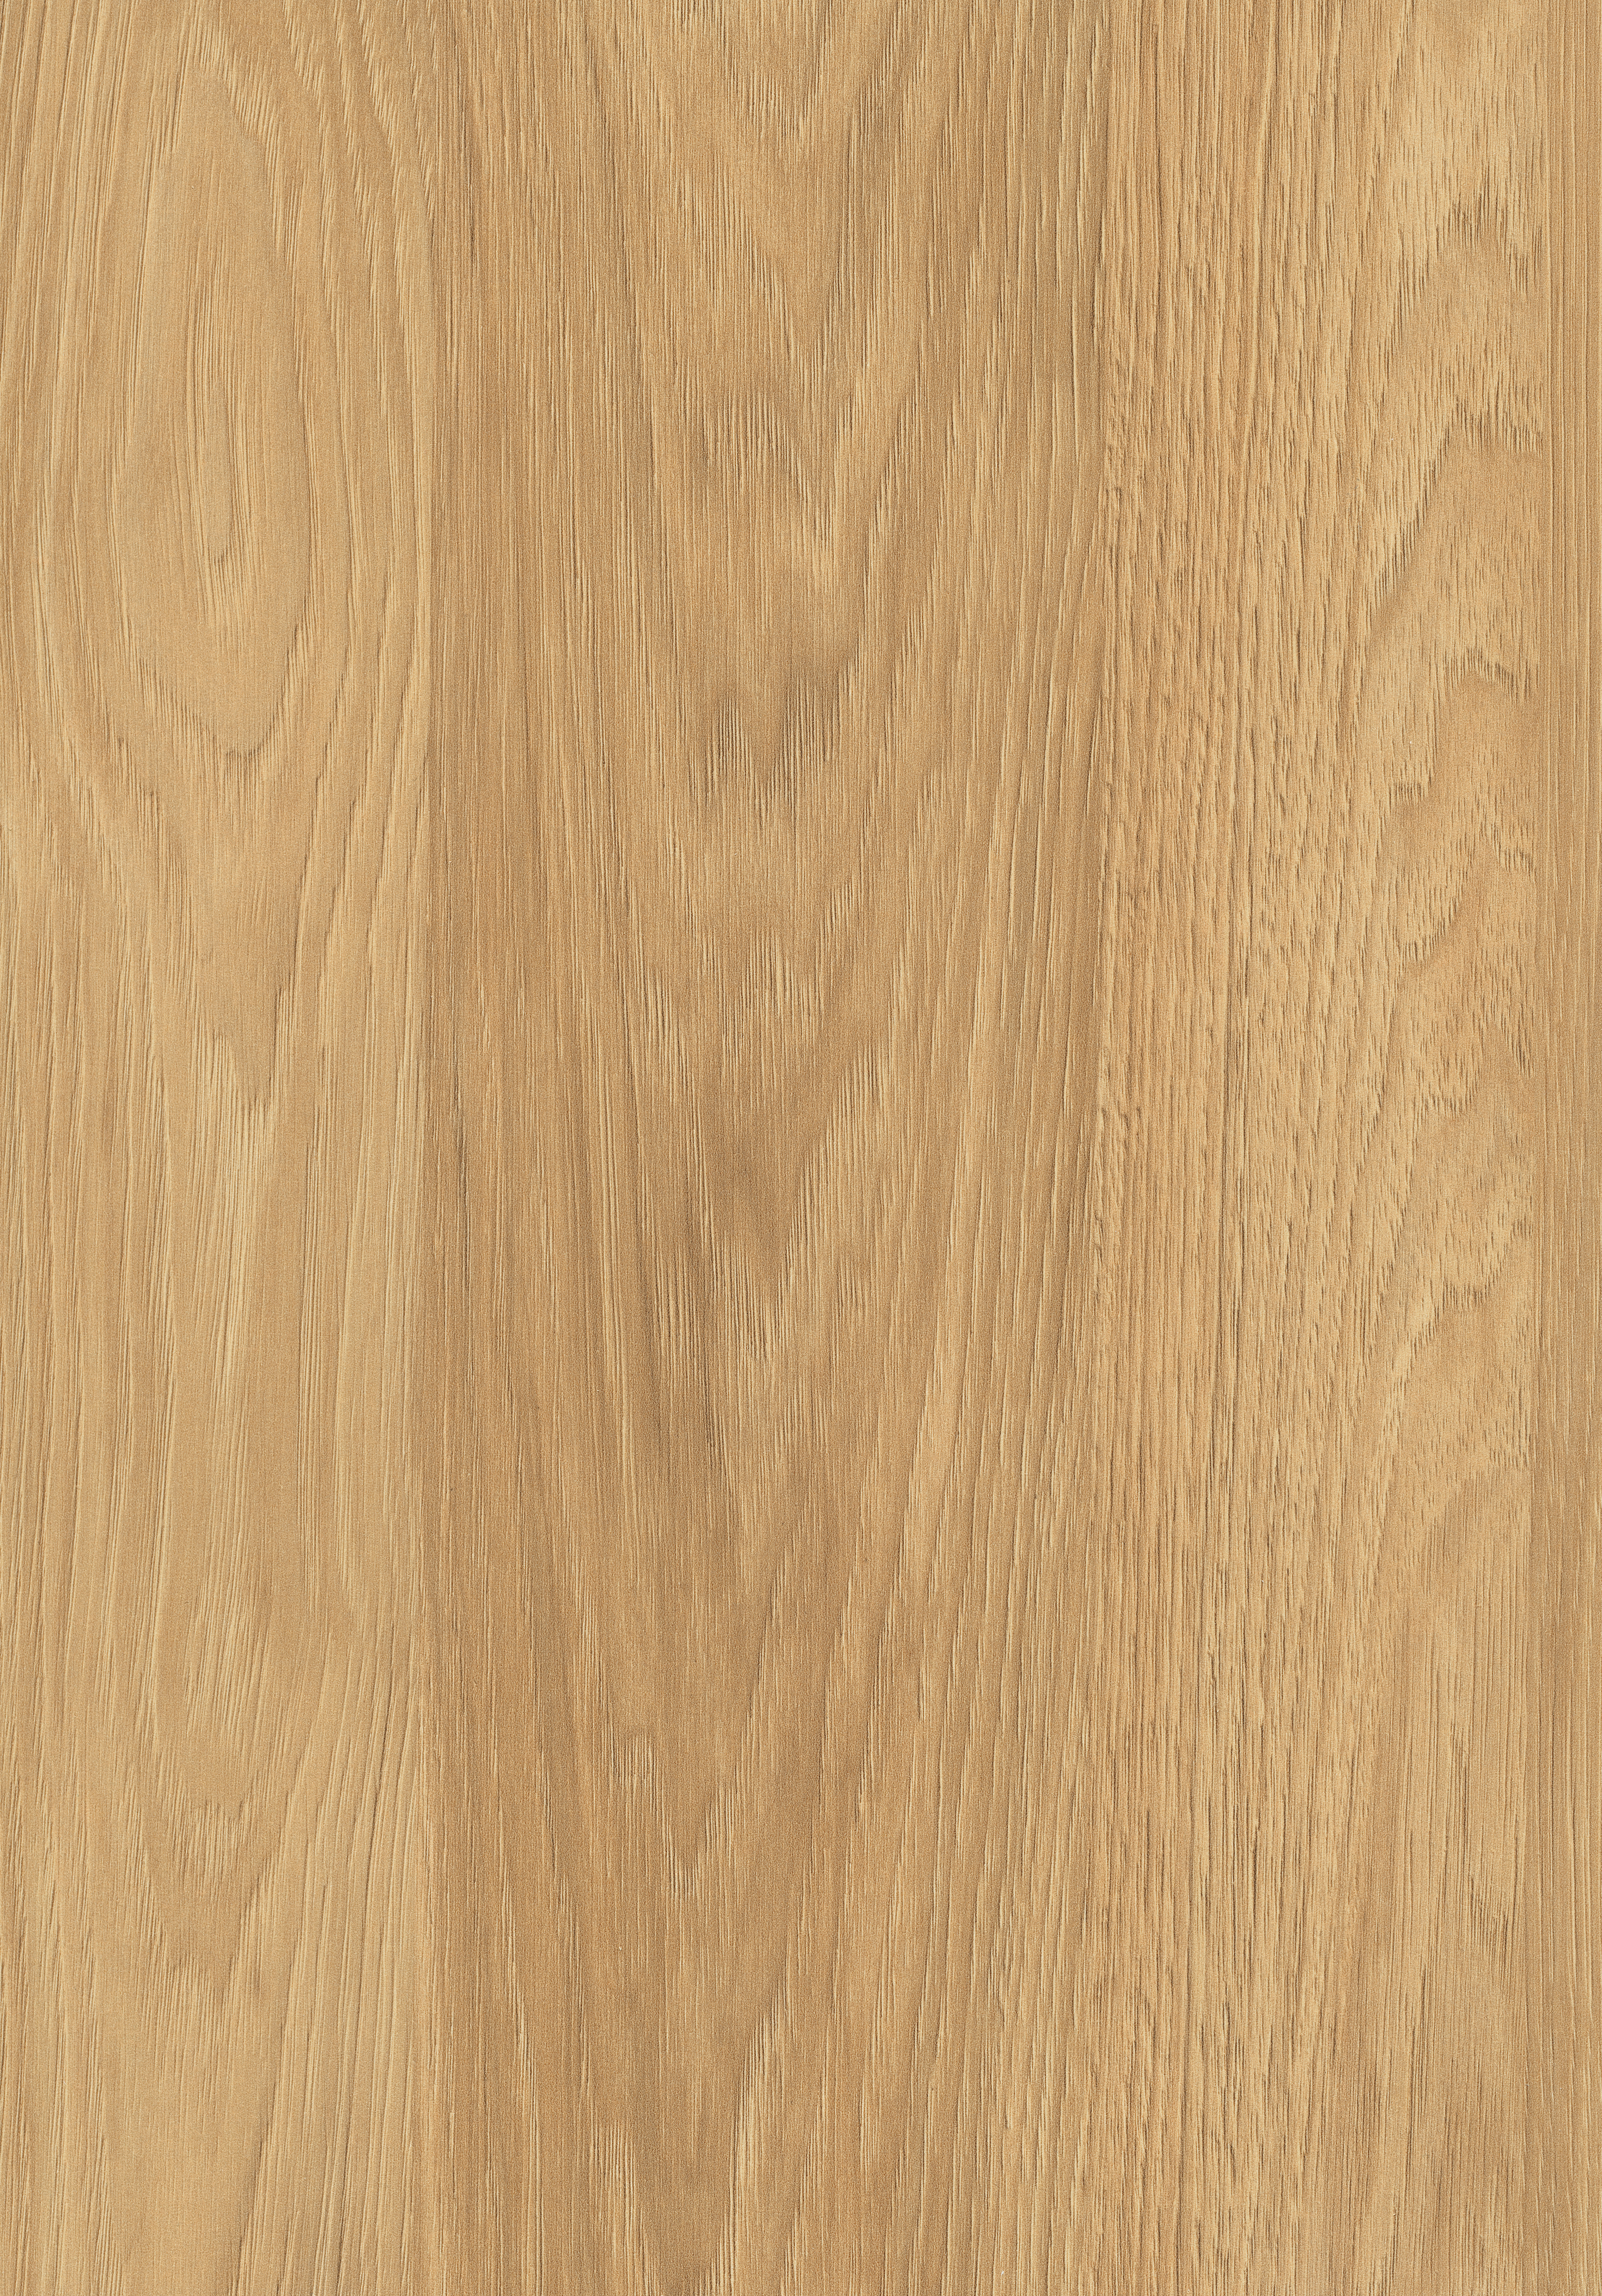 Hickory natuur H3730 ST10